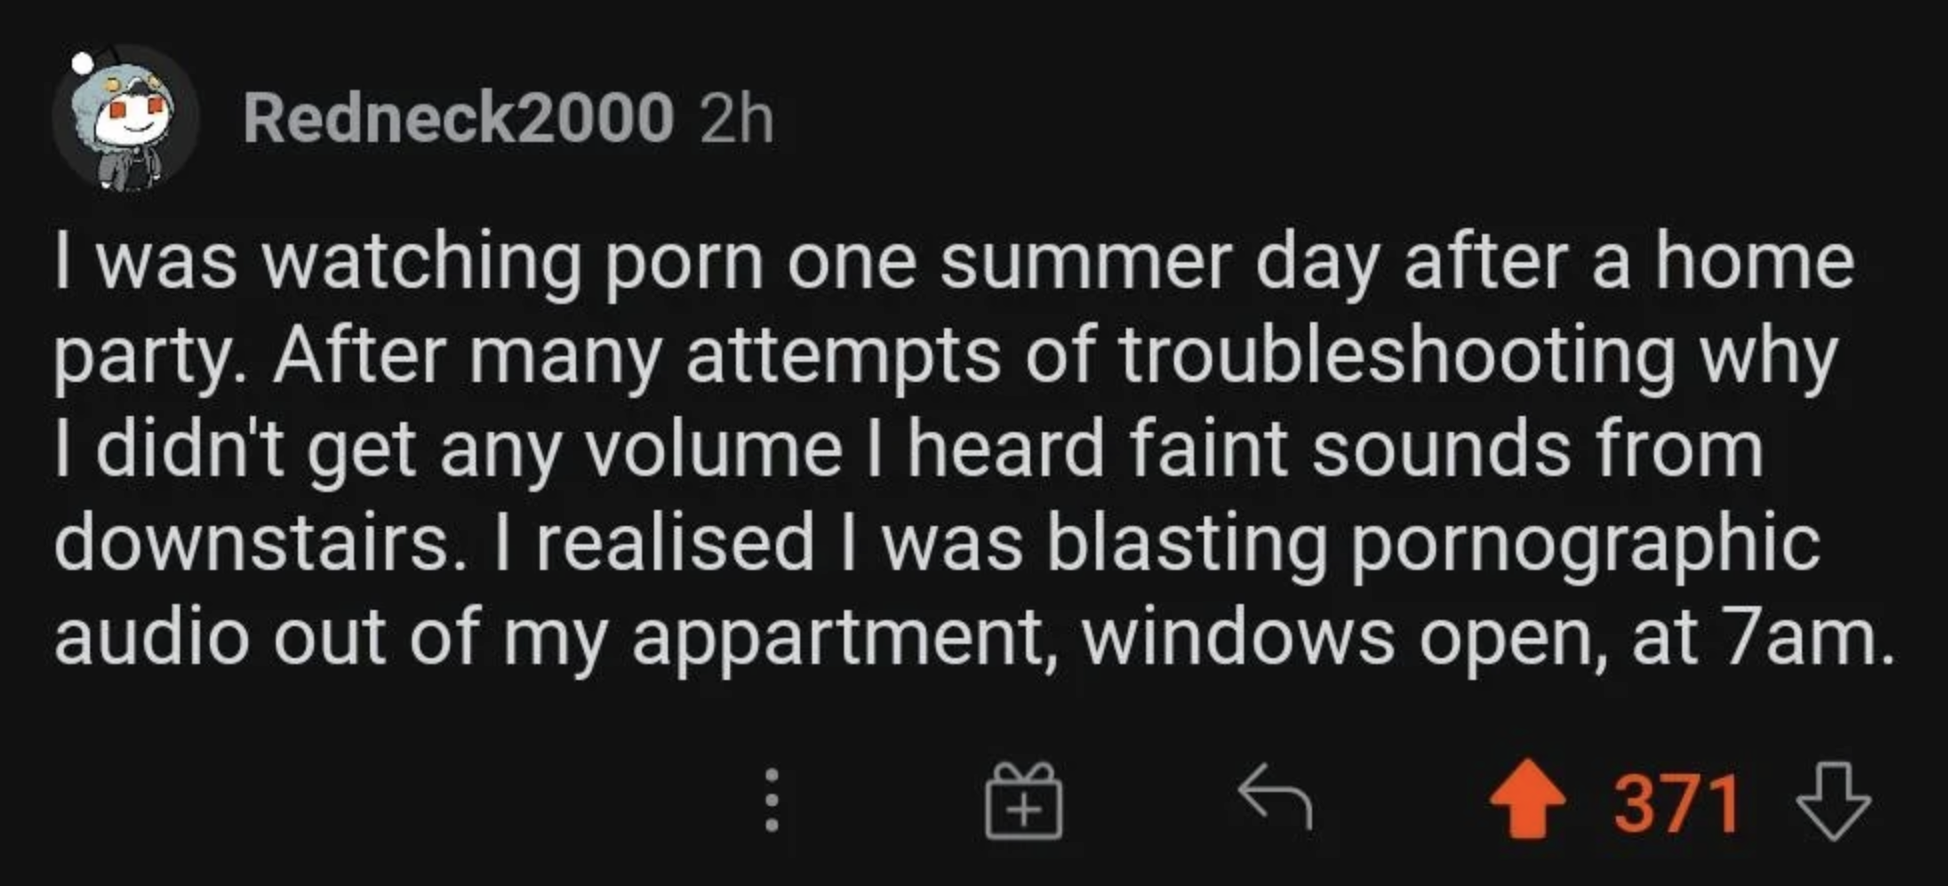 &quot;I was watching porn one summer day after a home party; after many attempts to troubleshoot why I had no volume, I heard faint sounds from downstairs and realized I was blasting pornographic audio out of my apartment, windows open, at 7am&quot;